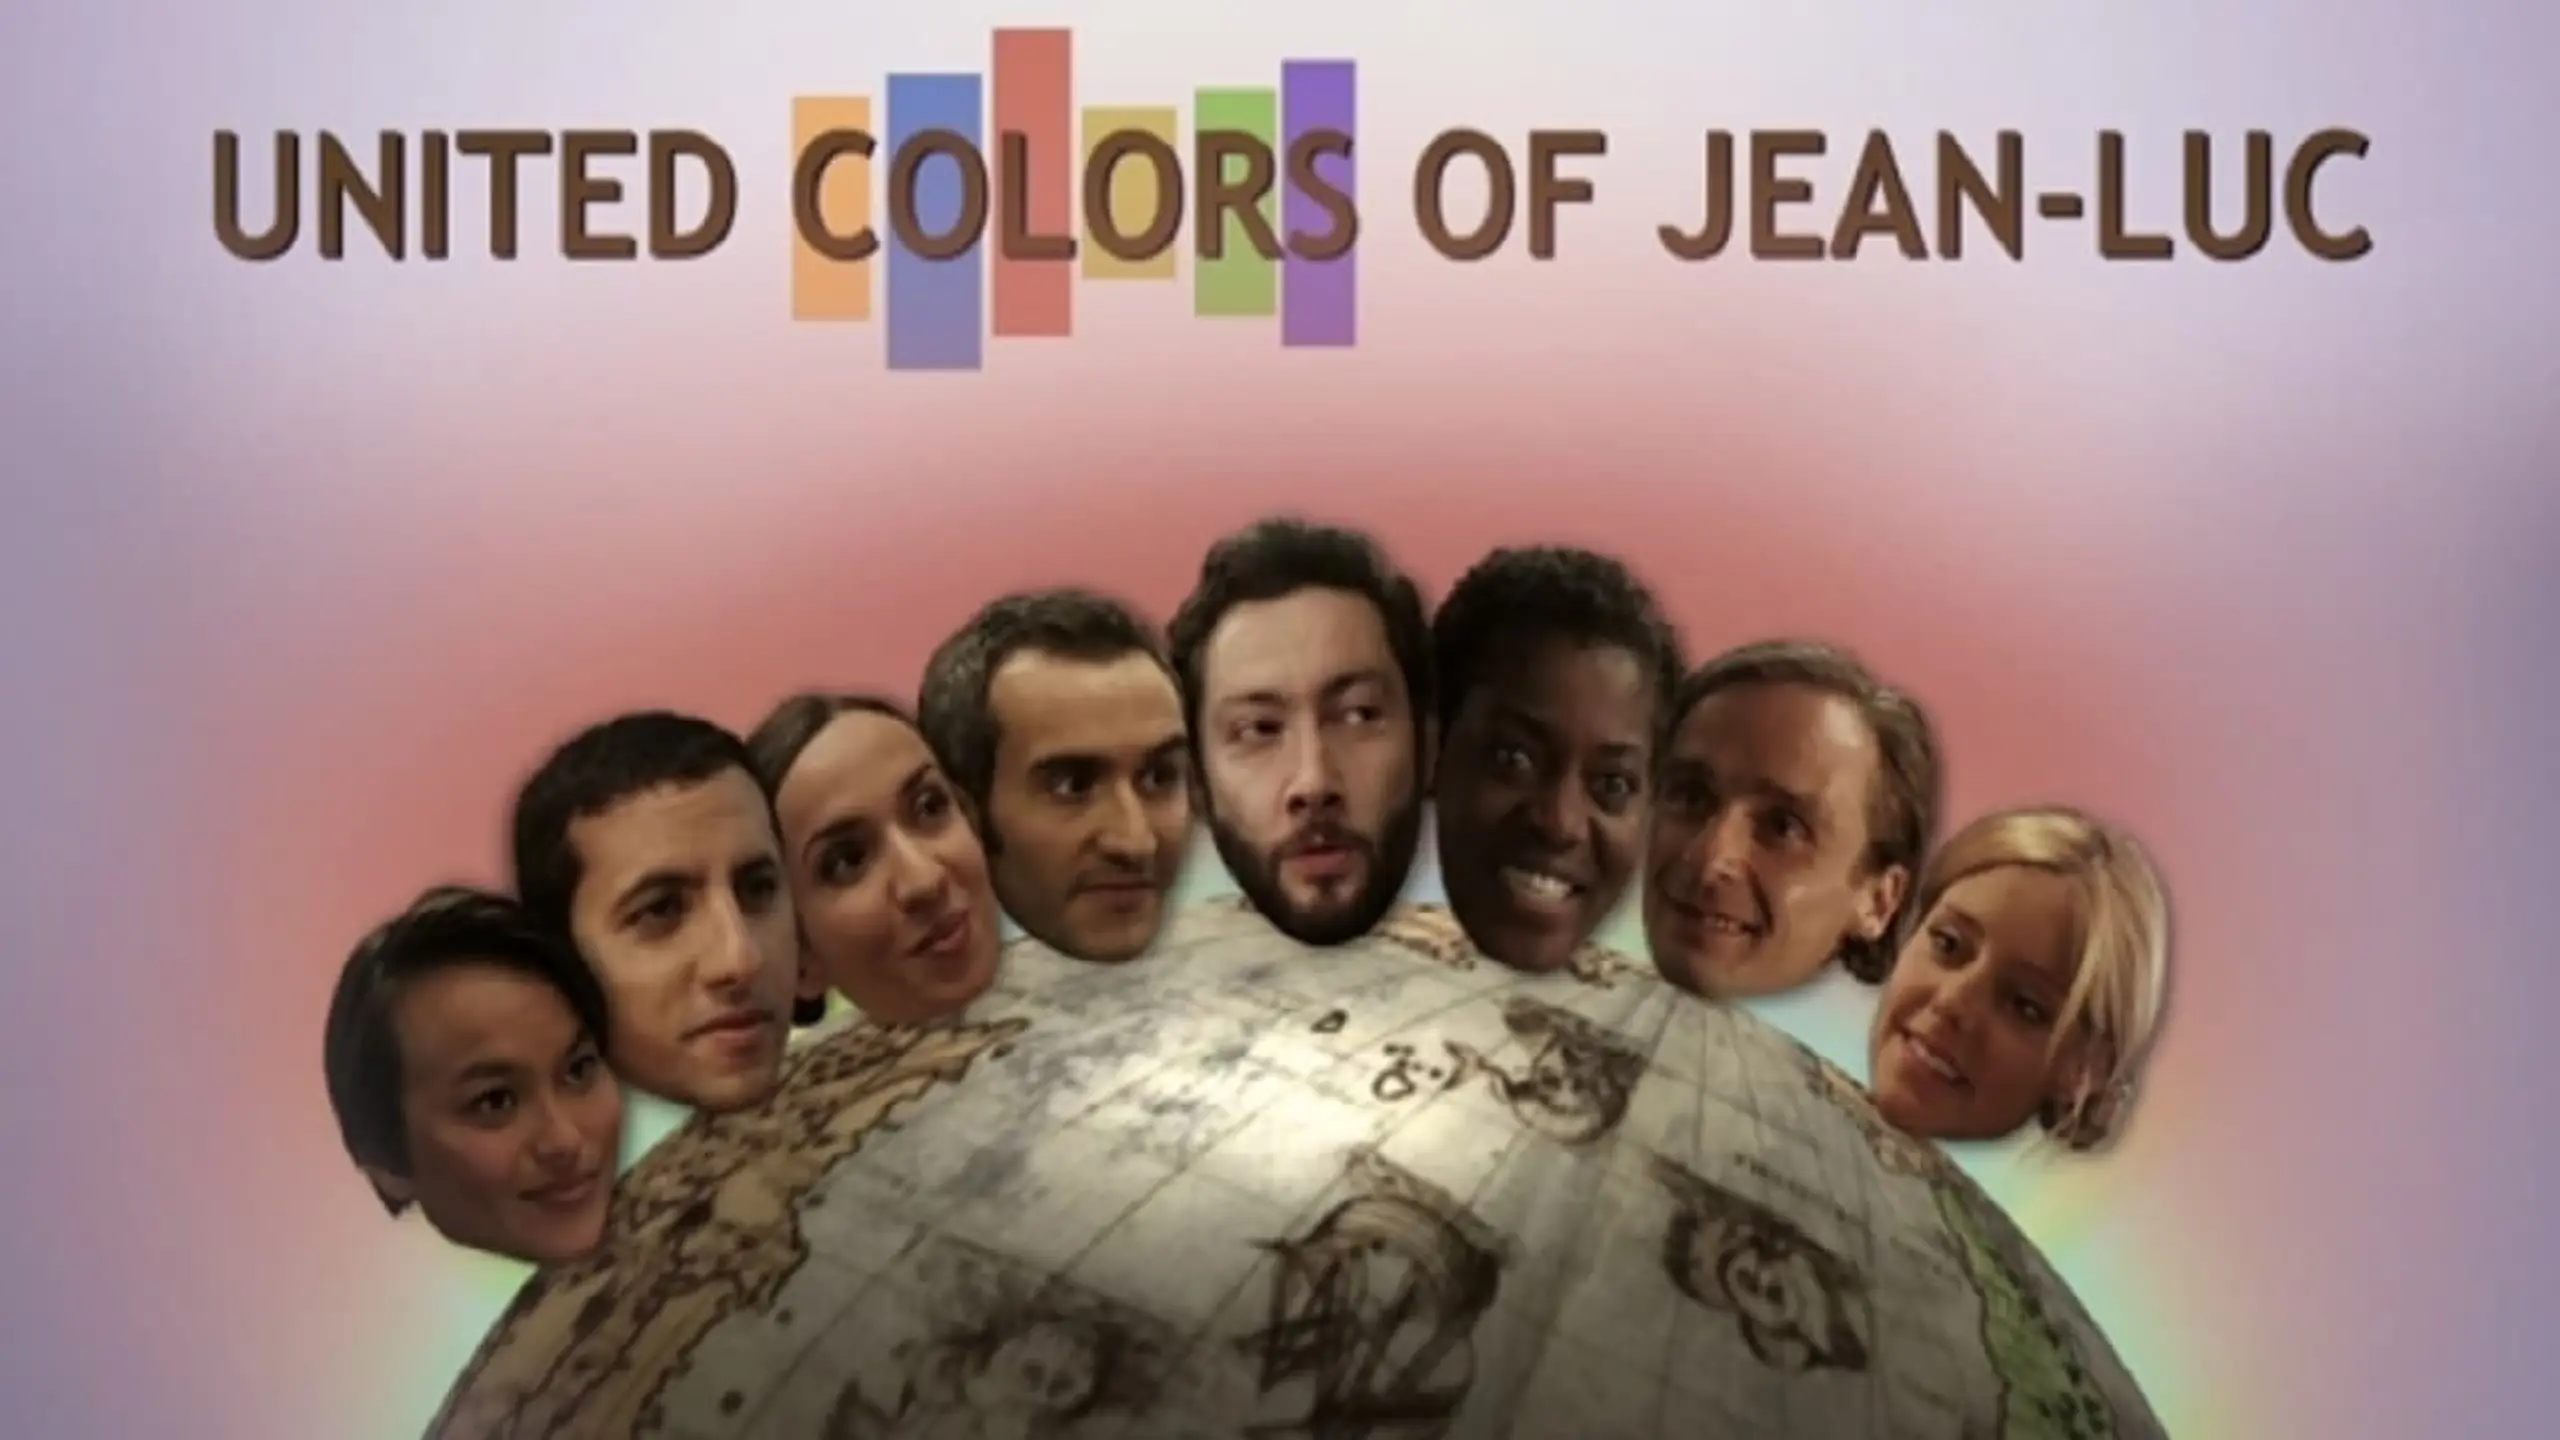 United Colors of Jean-Luc